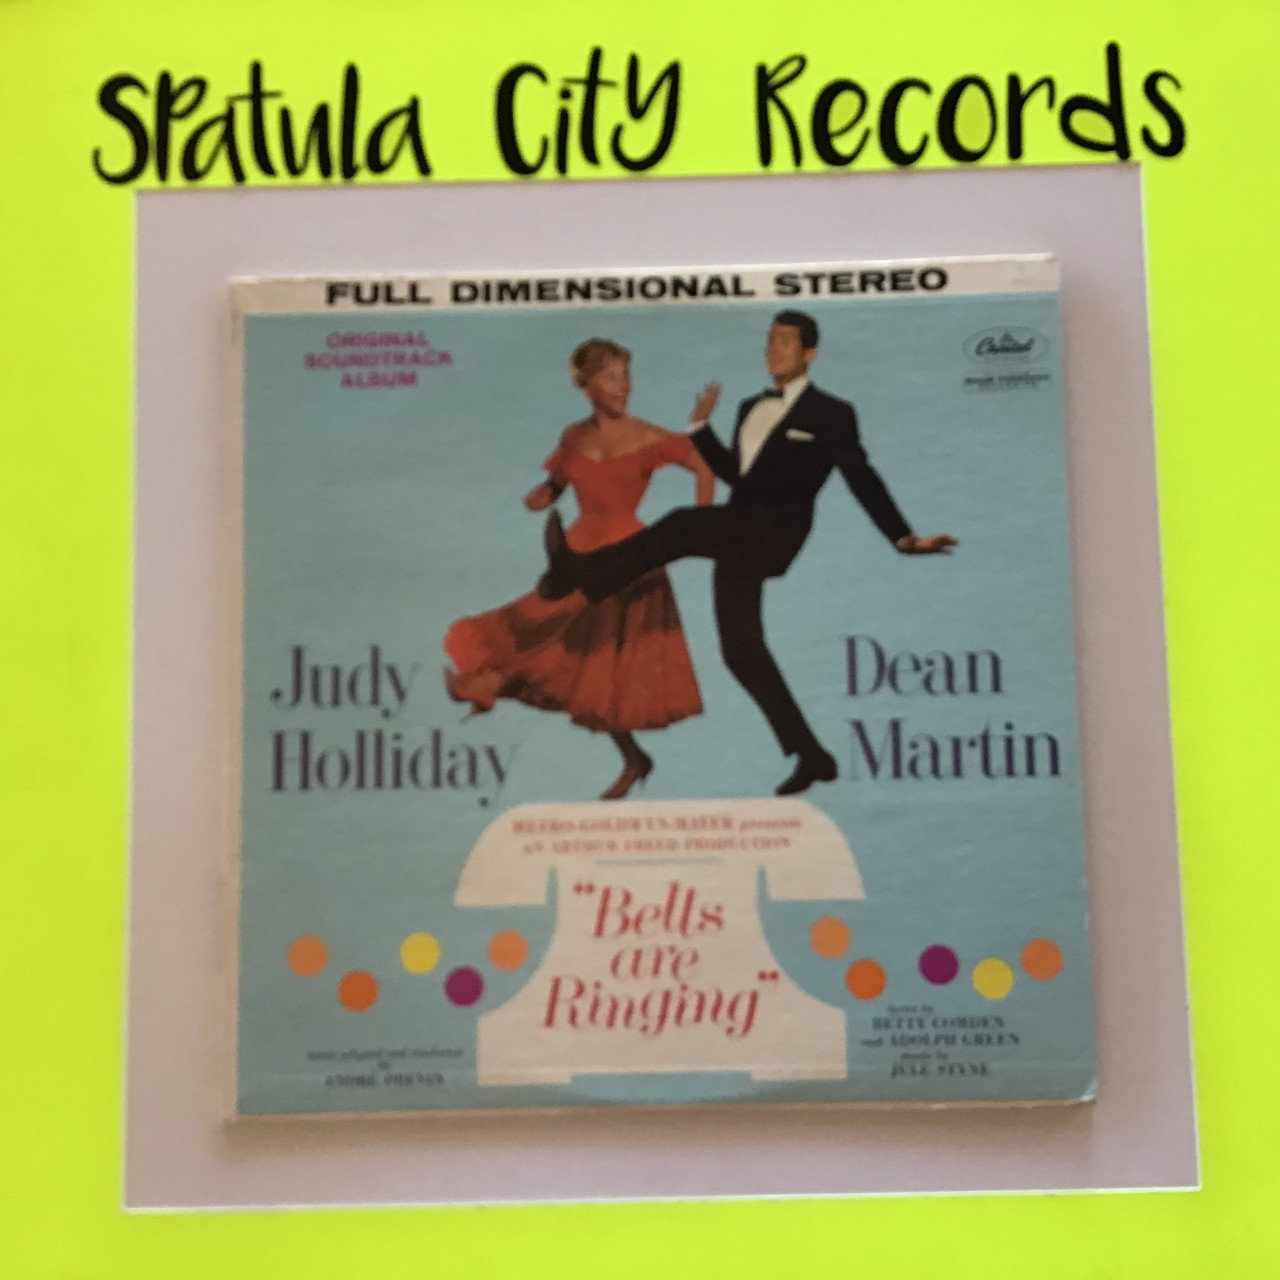 Judy Holliday and Dean Martin - Bells Are Ringing - soundtrack - vinyl record LP